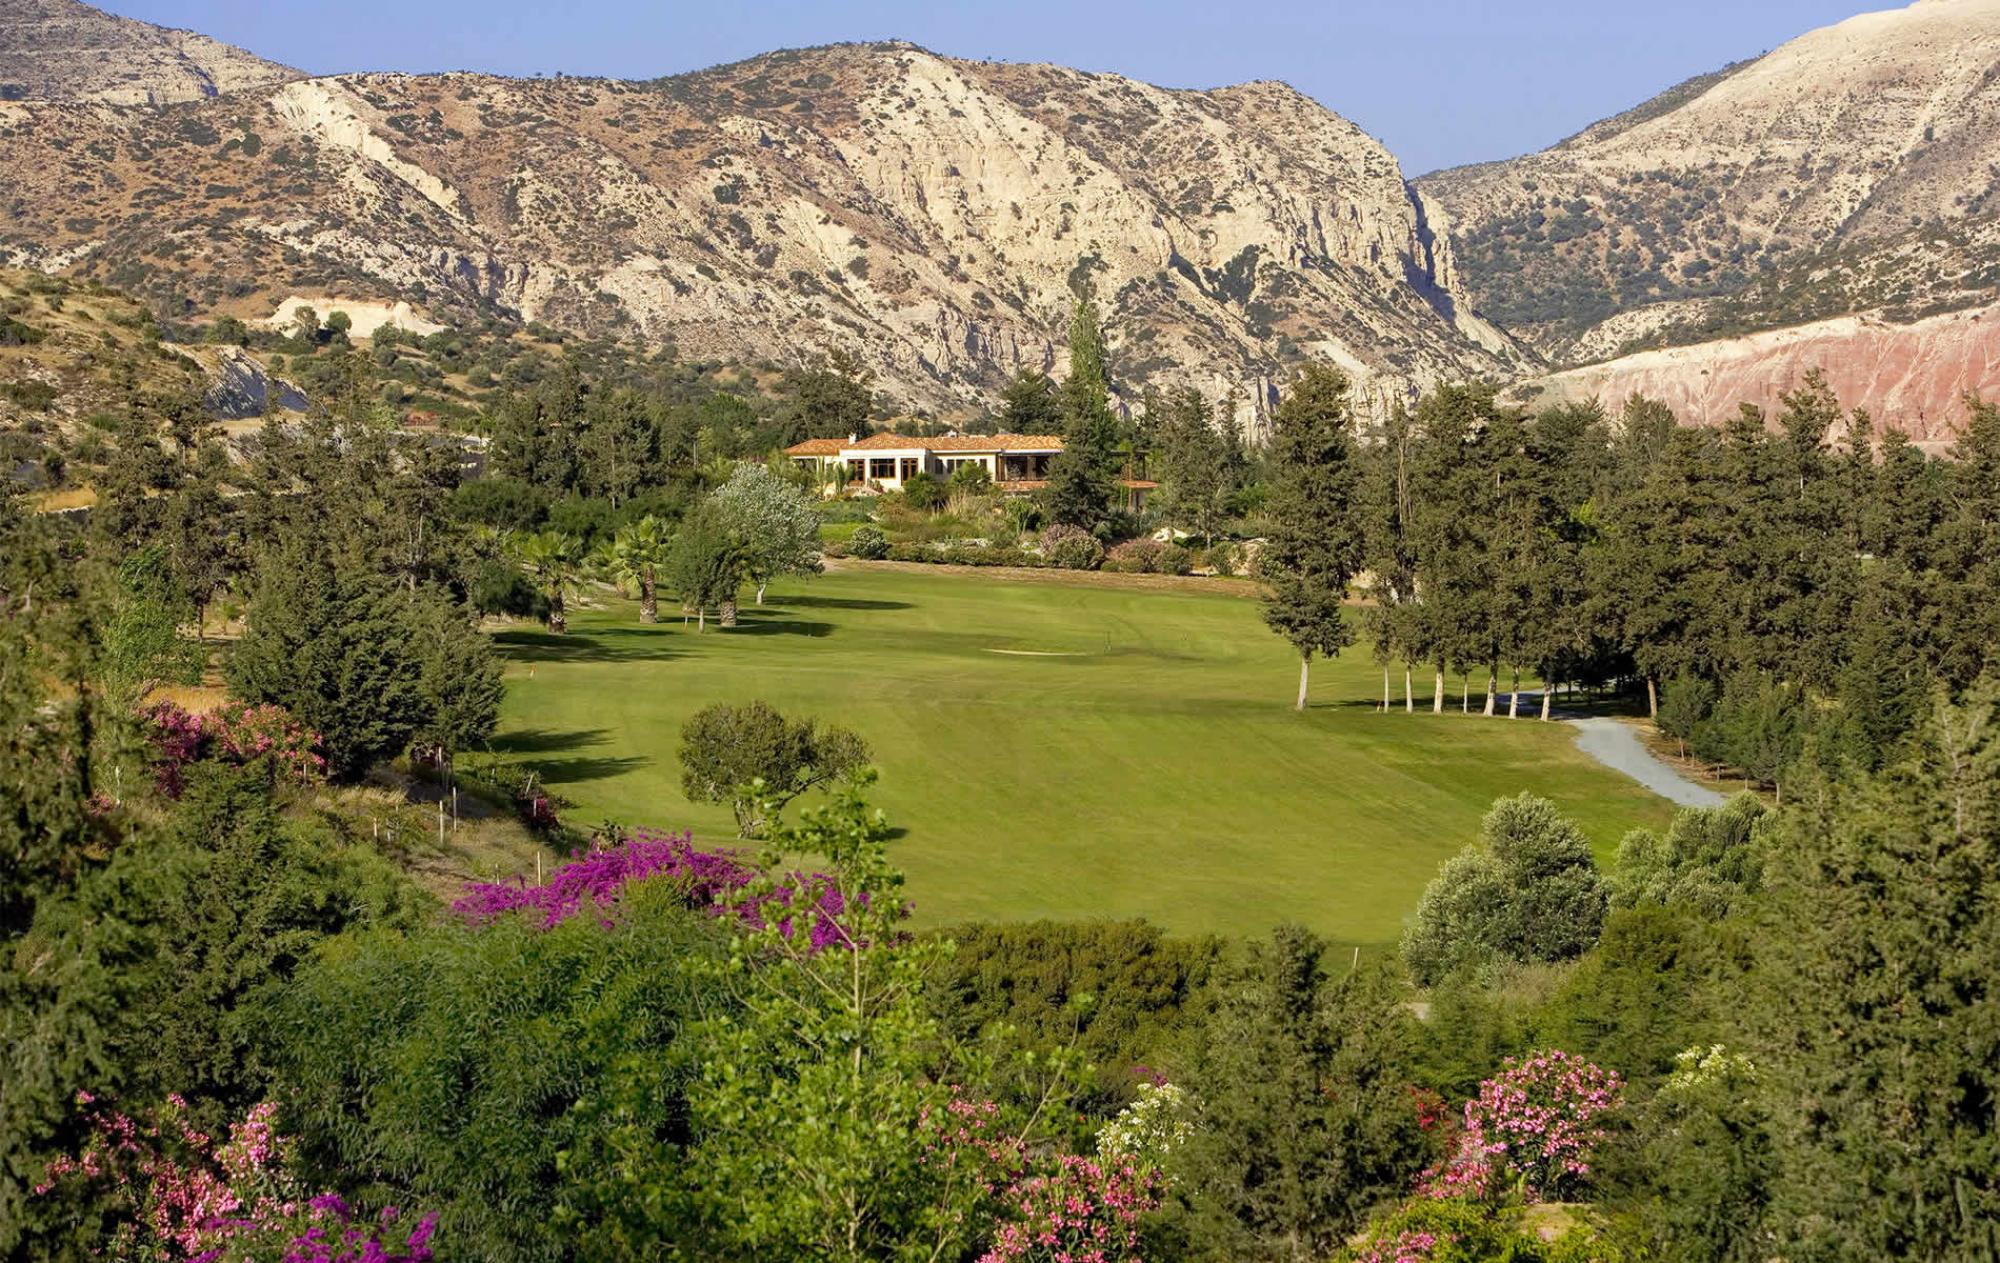 All The Secret Valley Golf Club's impressive golf course situated in breathtaking Paphos.